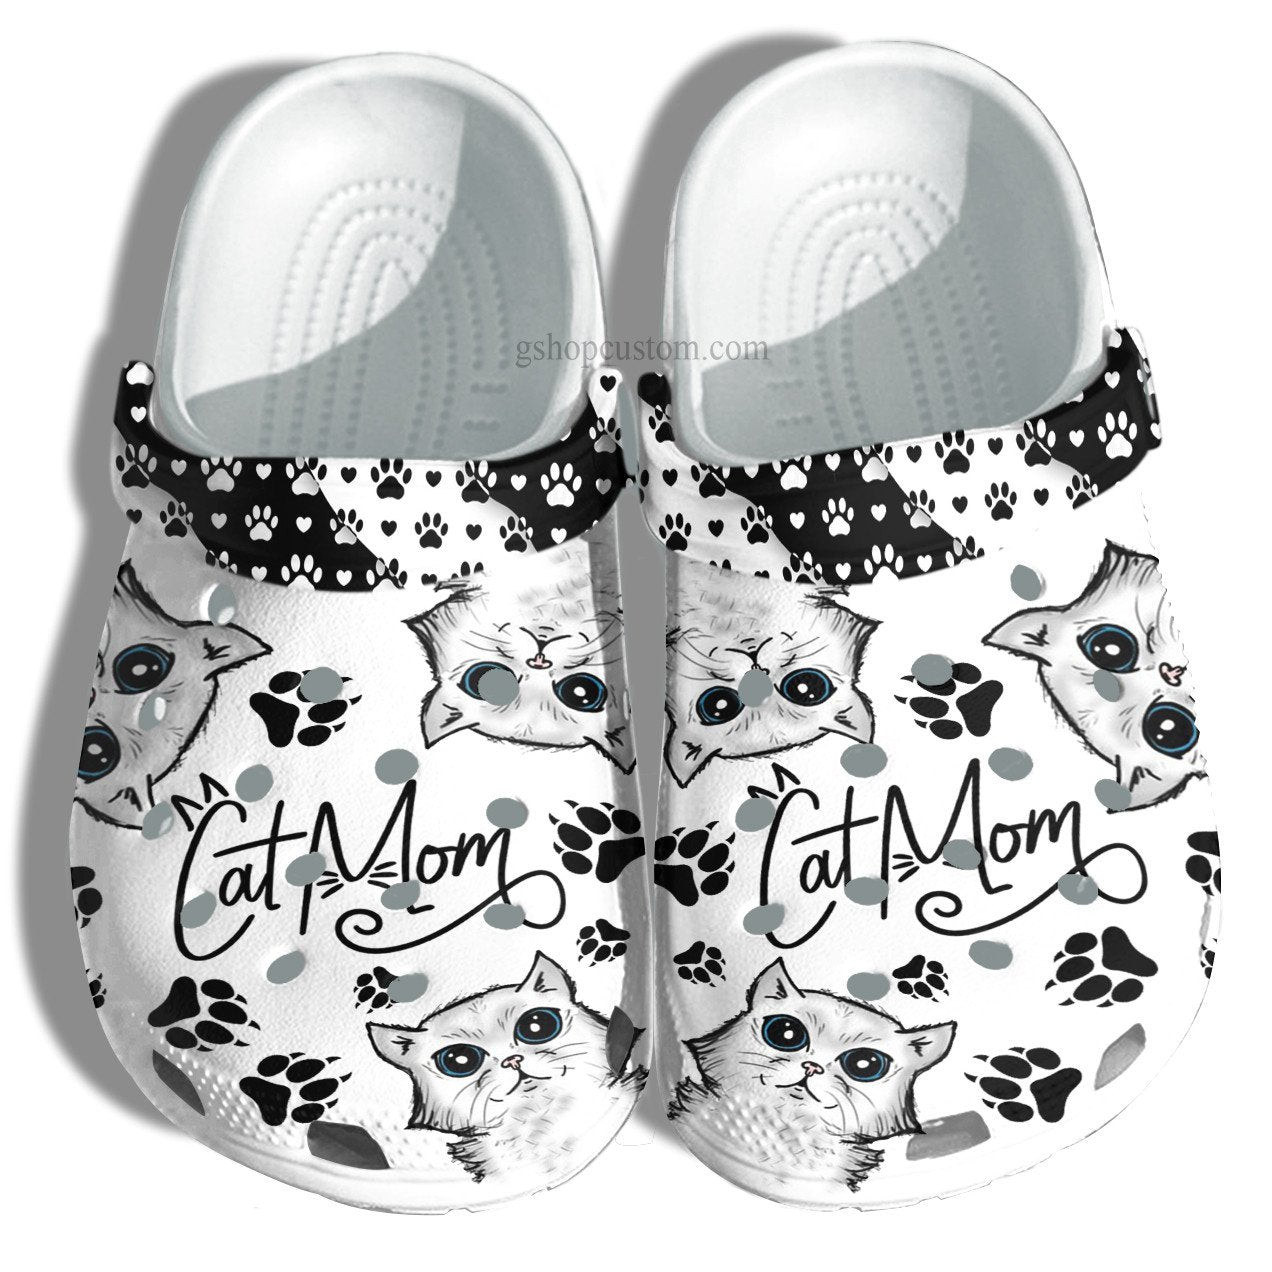 Cat Mom Black White Croc Shoes Mother Day Gift- Cat Lover Crocs Shoes For Women